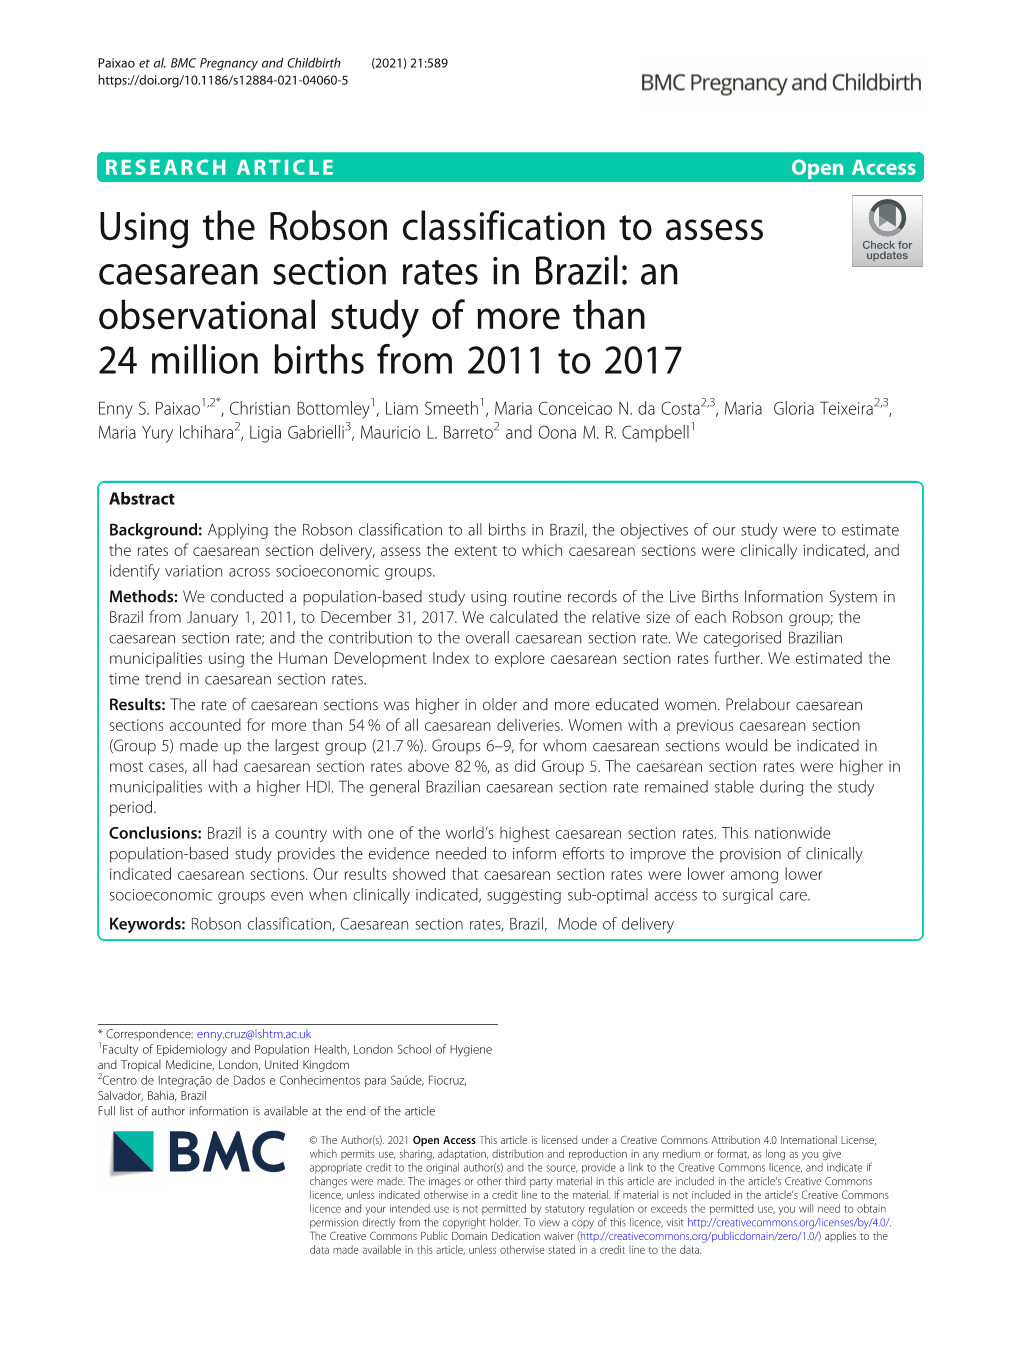 Using the Robson Classification to Assess Caesarean Section Rates in Brazil: an Observational Study of More Than 24 Million Births from 2011 to 2017 Enny S